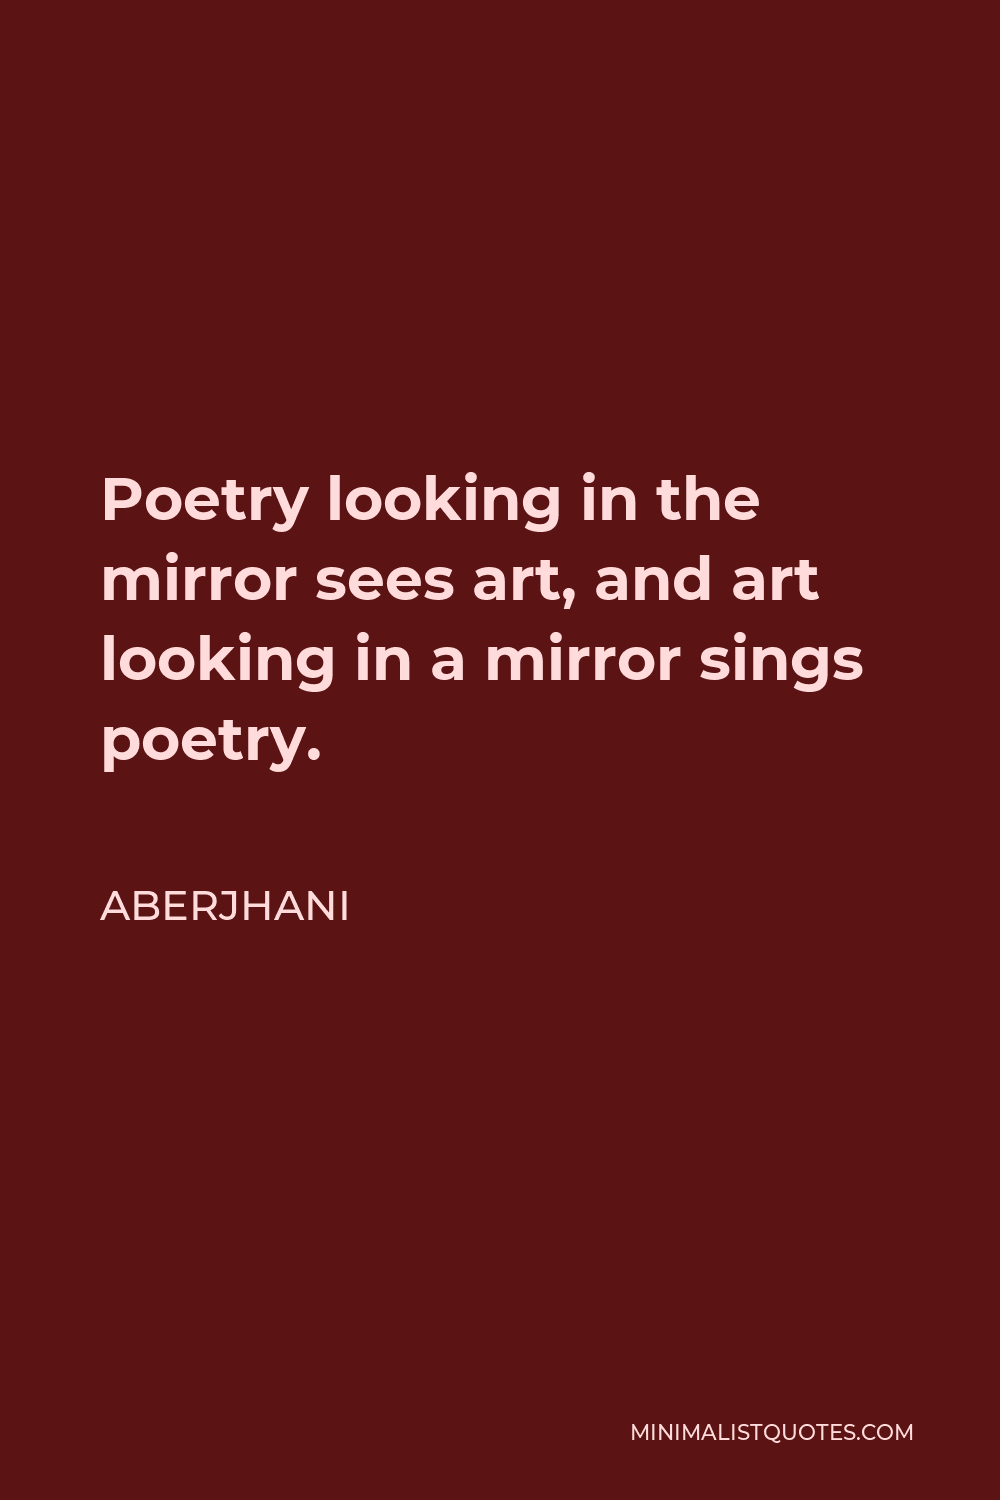 Aberjhani Quote - Poetry looking in the mirror sees art, and art looking in a mirror sings poetry.